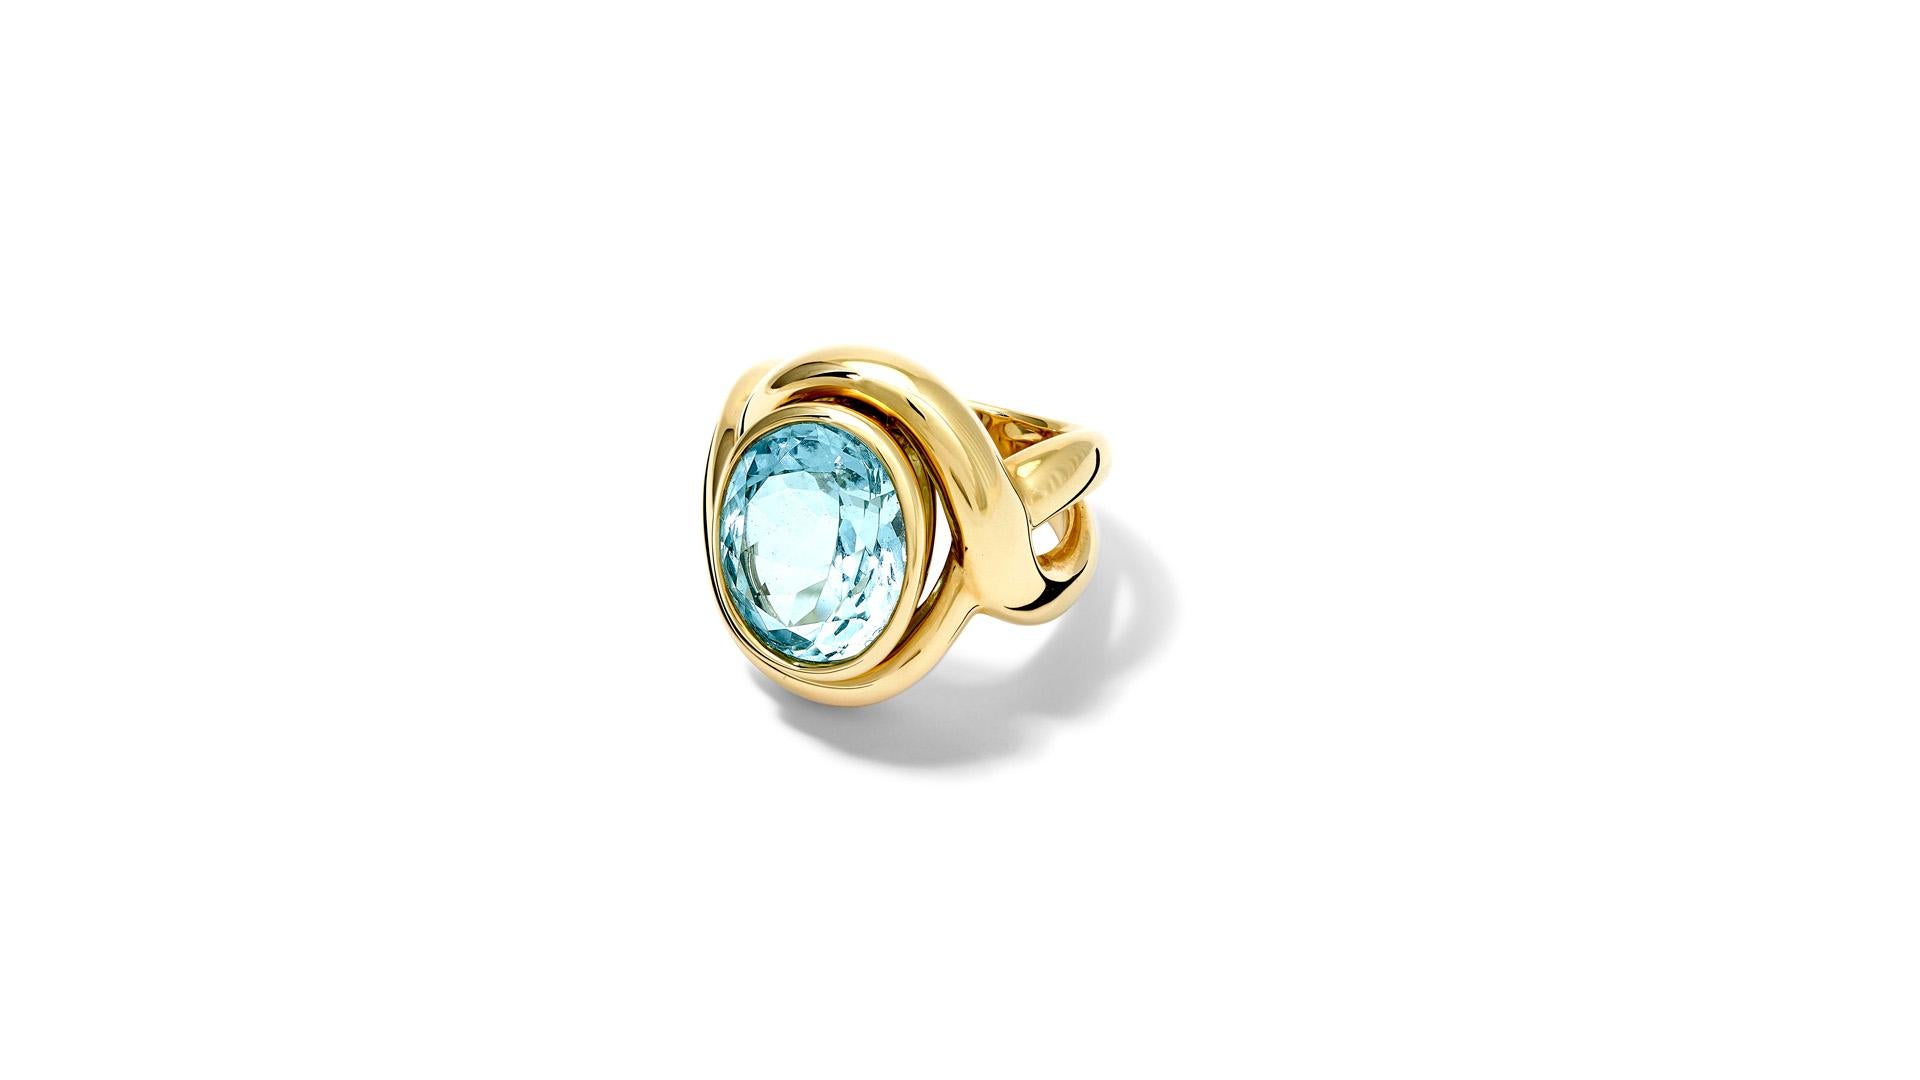 Severine 18 carat yellow gold ring set with an oval cut facetted soft blue aquamarine. The stone set vertically. From the Journey to Scandinavia.

This ring is a finger size 54, however can be resized. Please contact us for more information about